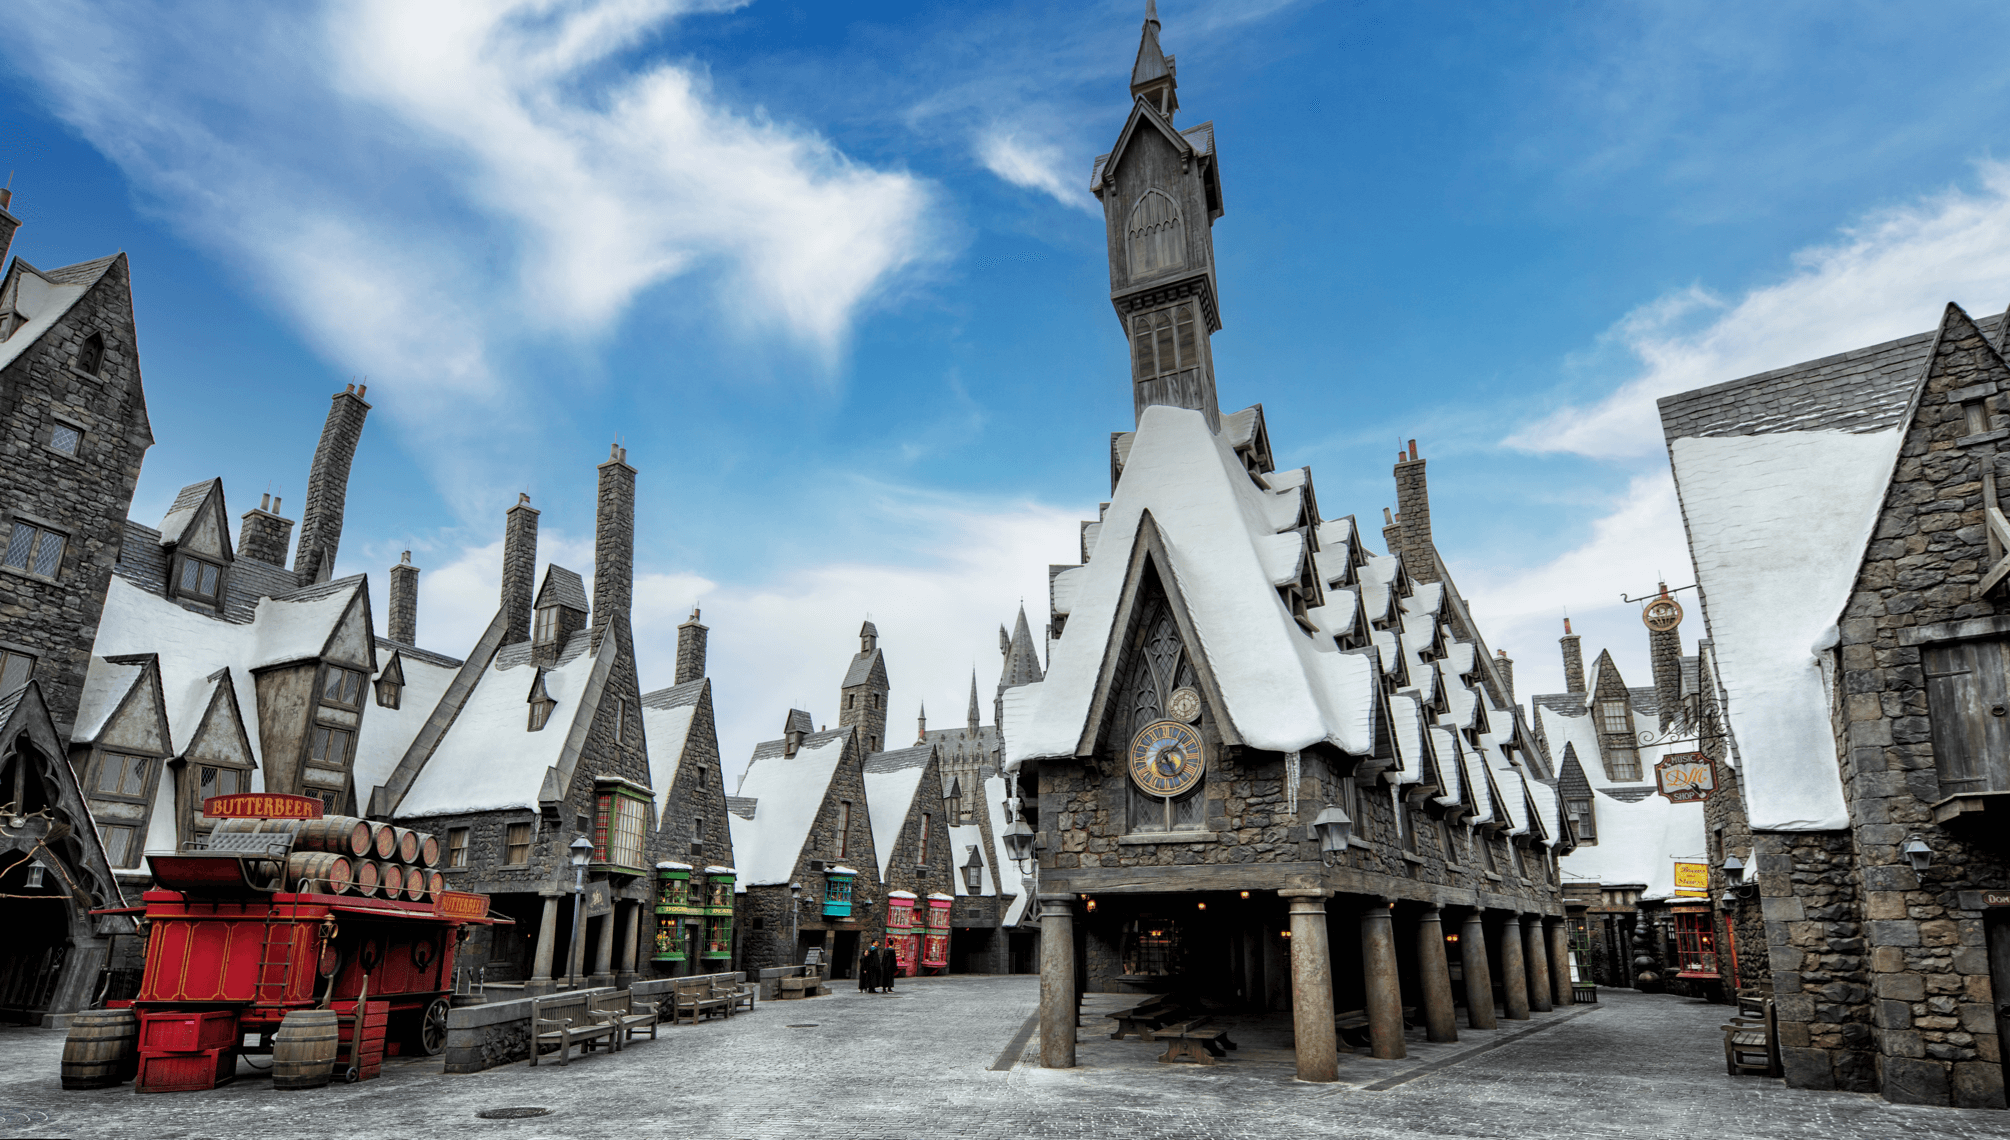 The Wizarding World of Harry Potter: Two Exciting Lands, One